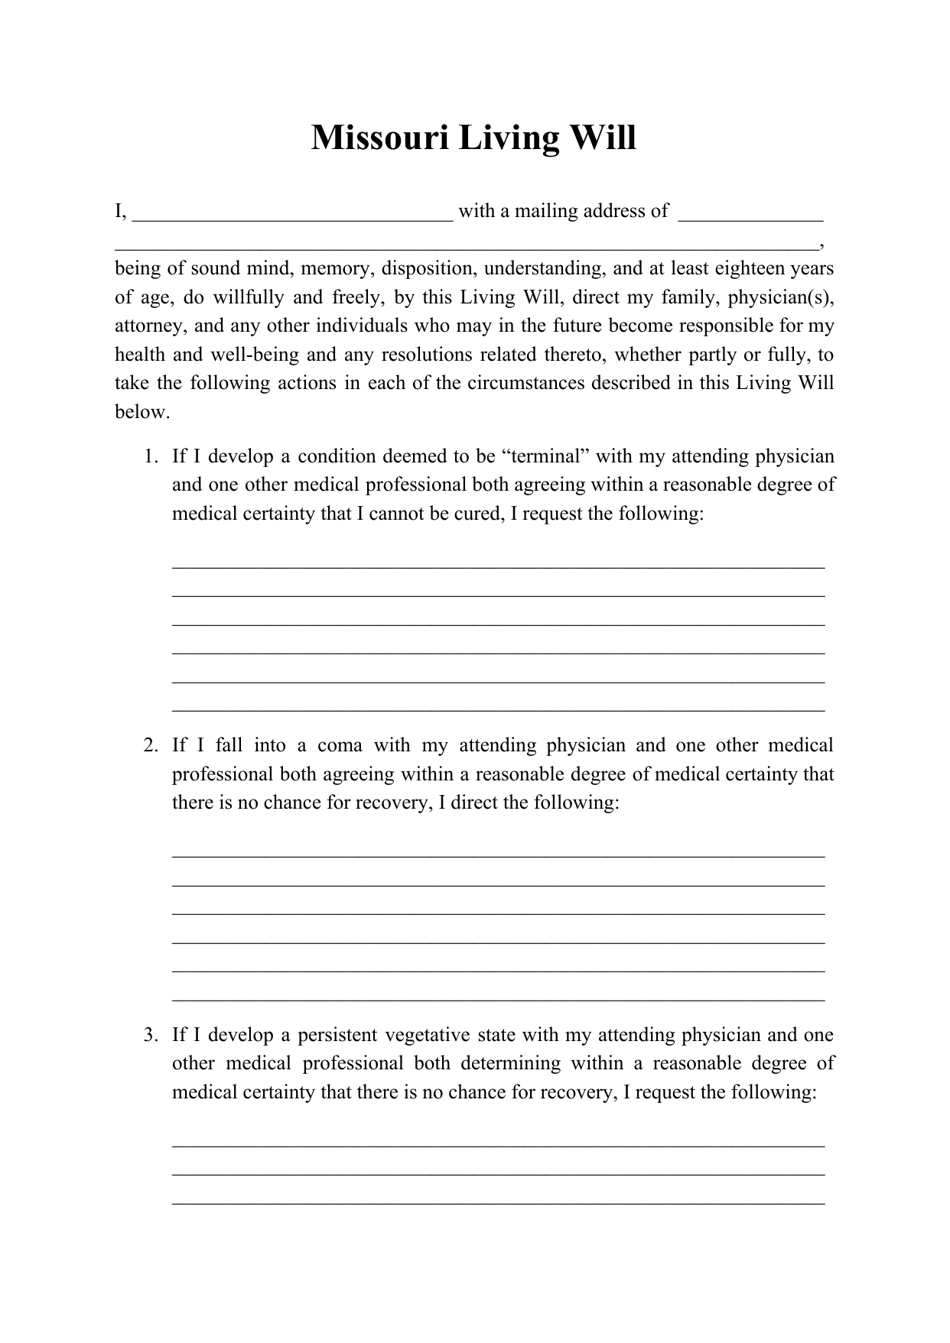 missouri-living-will-form-fill-out-sign-online-and-download-pdf-templateroller